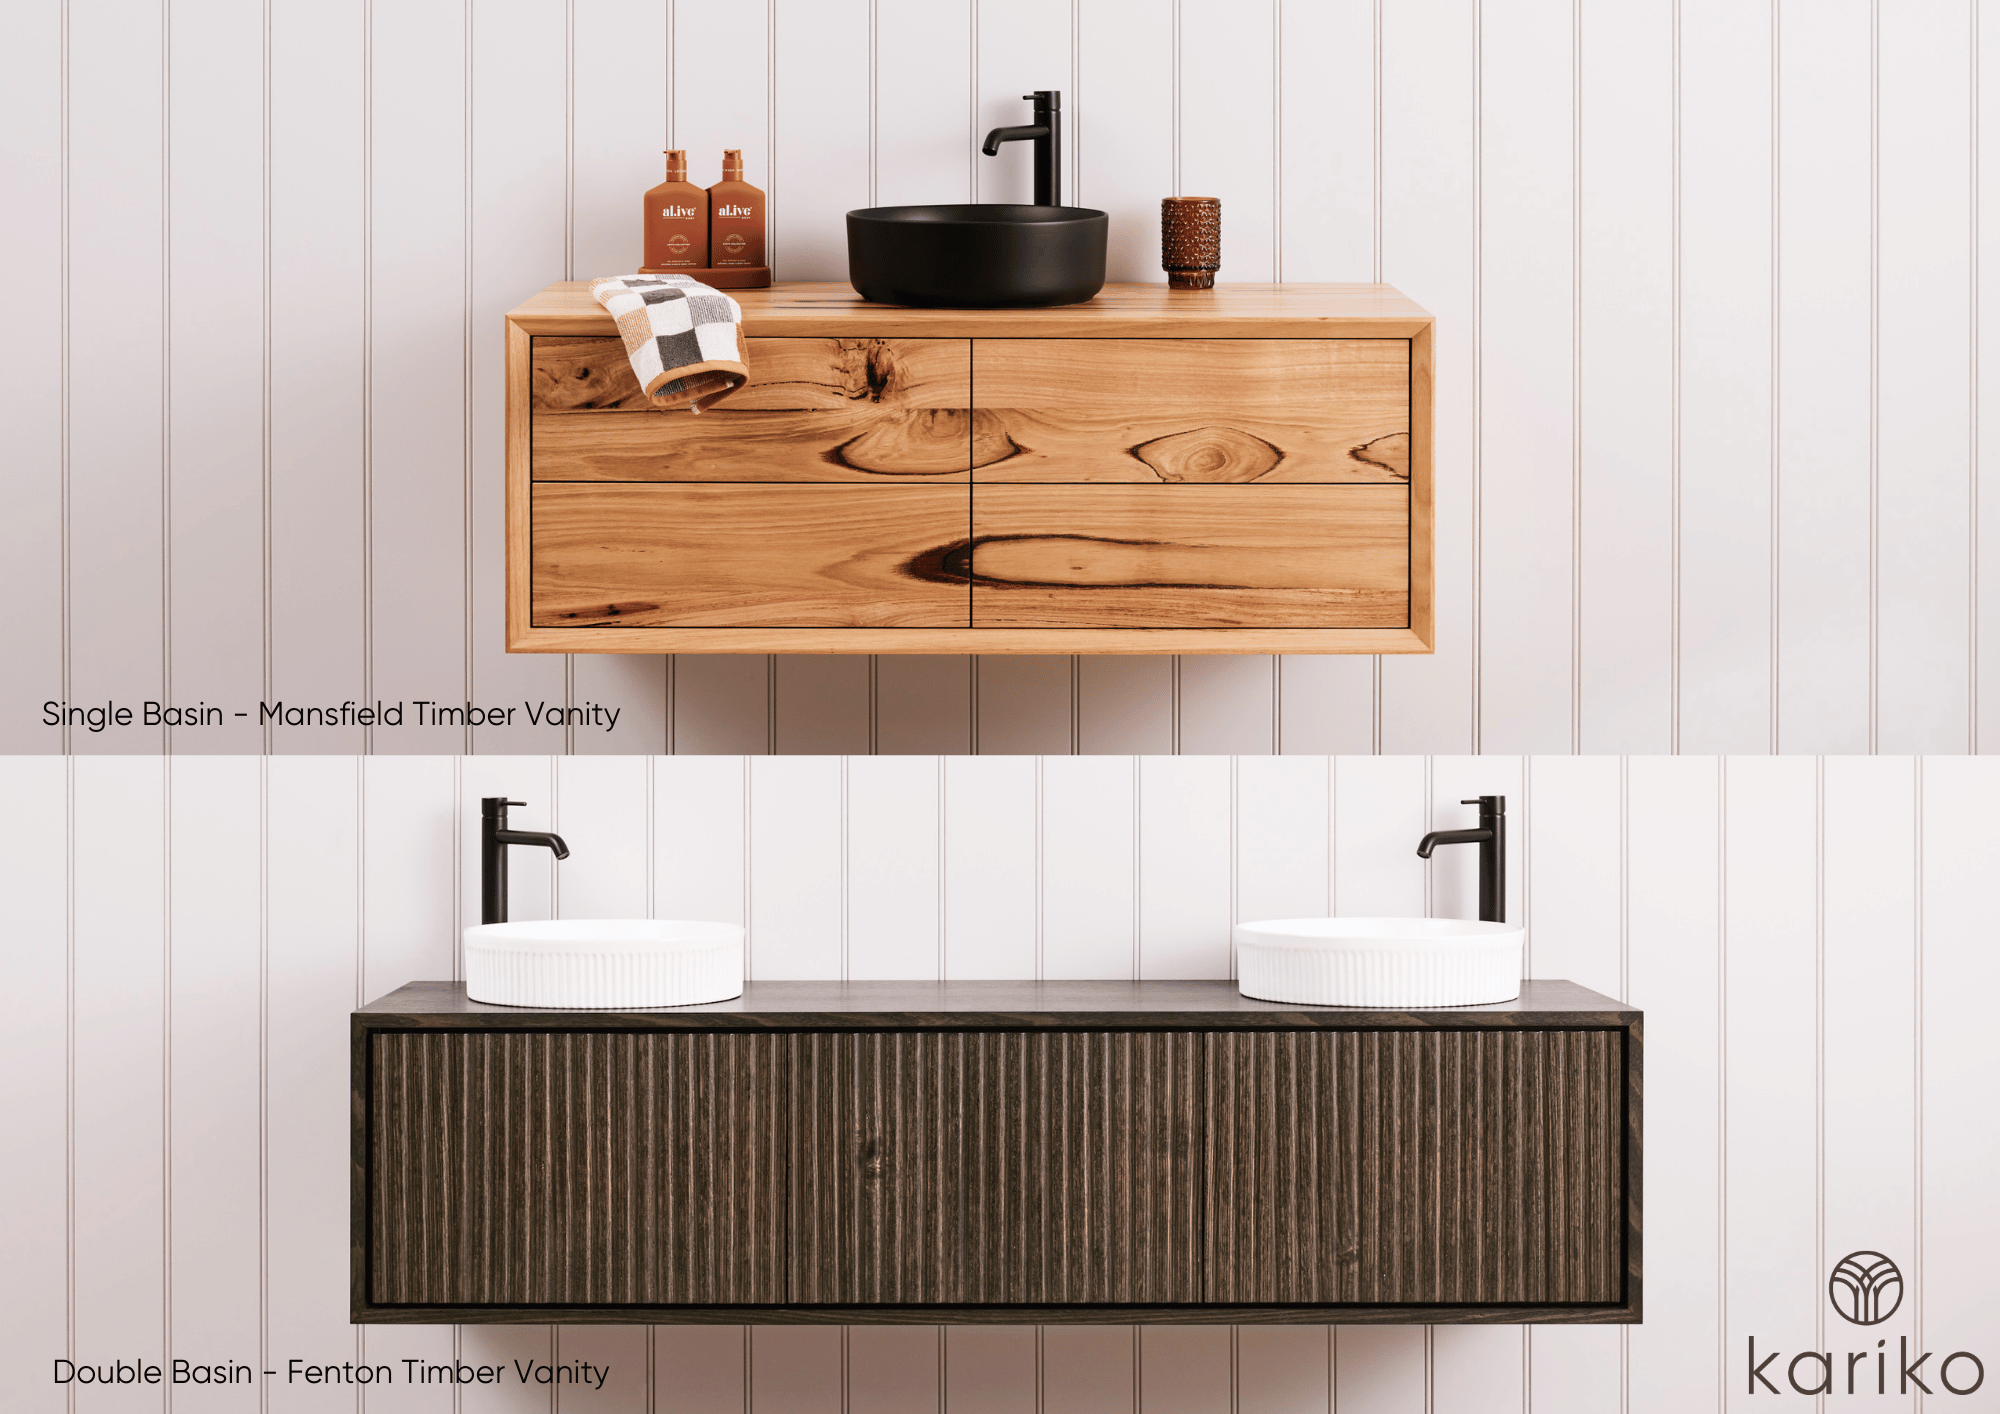 A comparison between a single basing and double basin timber vanity